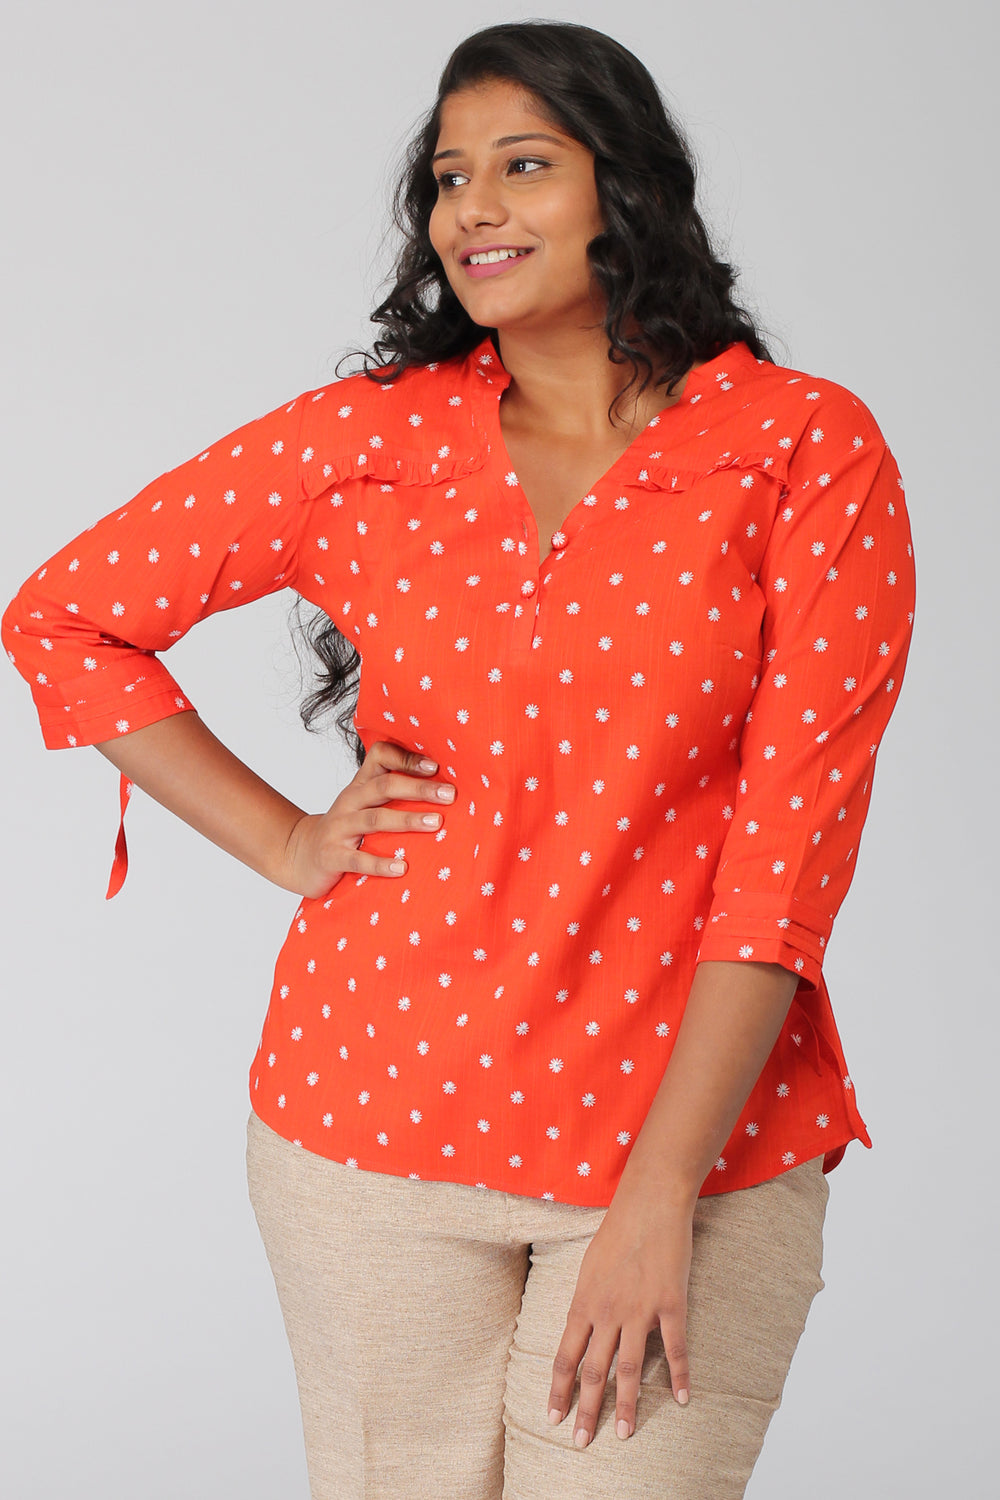 Tangerine Floral Popover Top with Tieup sleeves